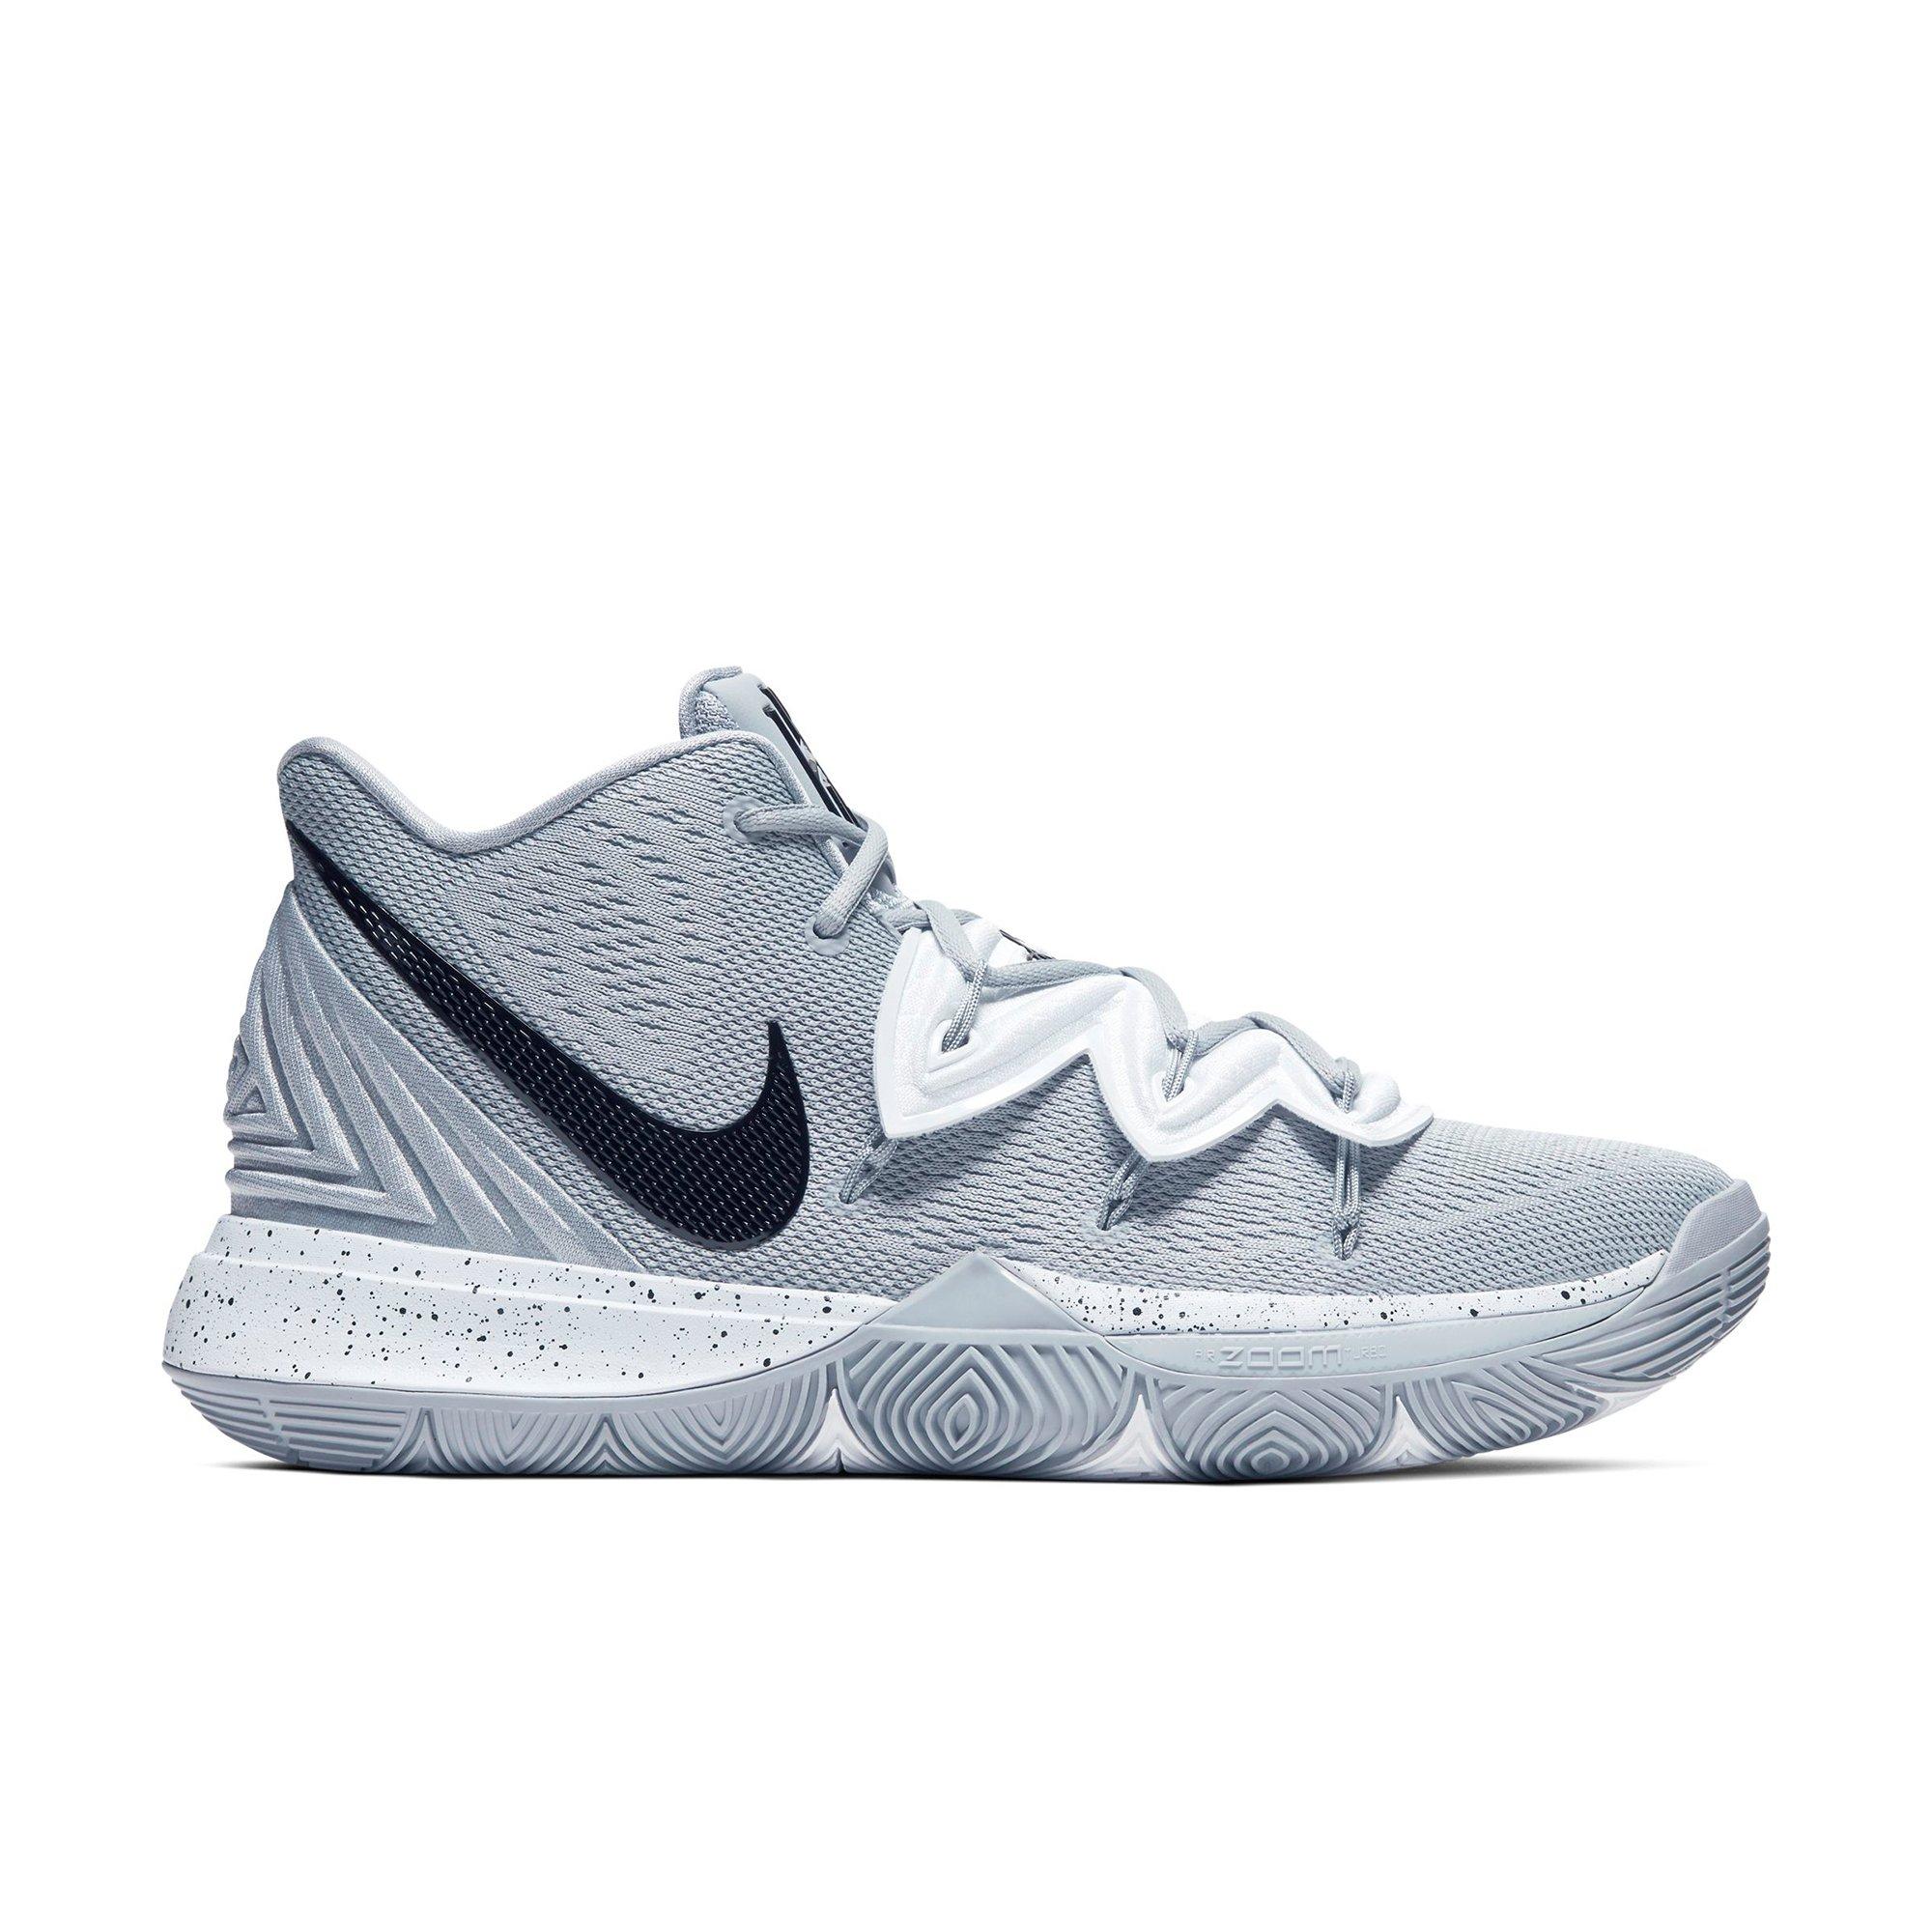 kyrie 5 gray and white